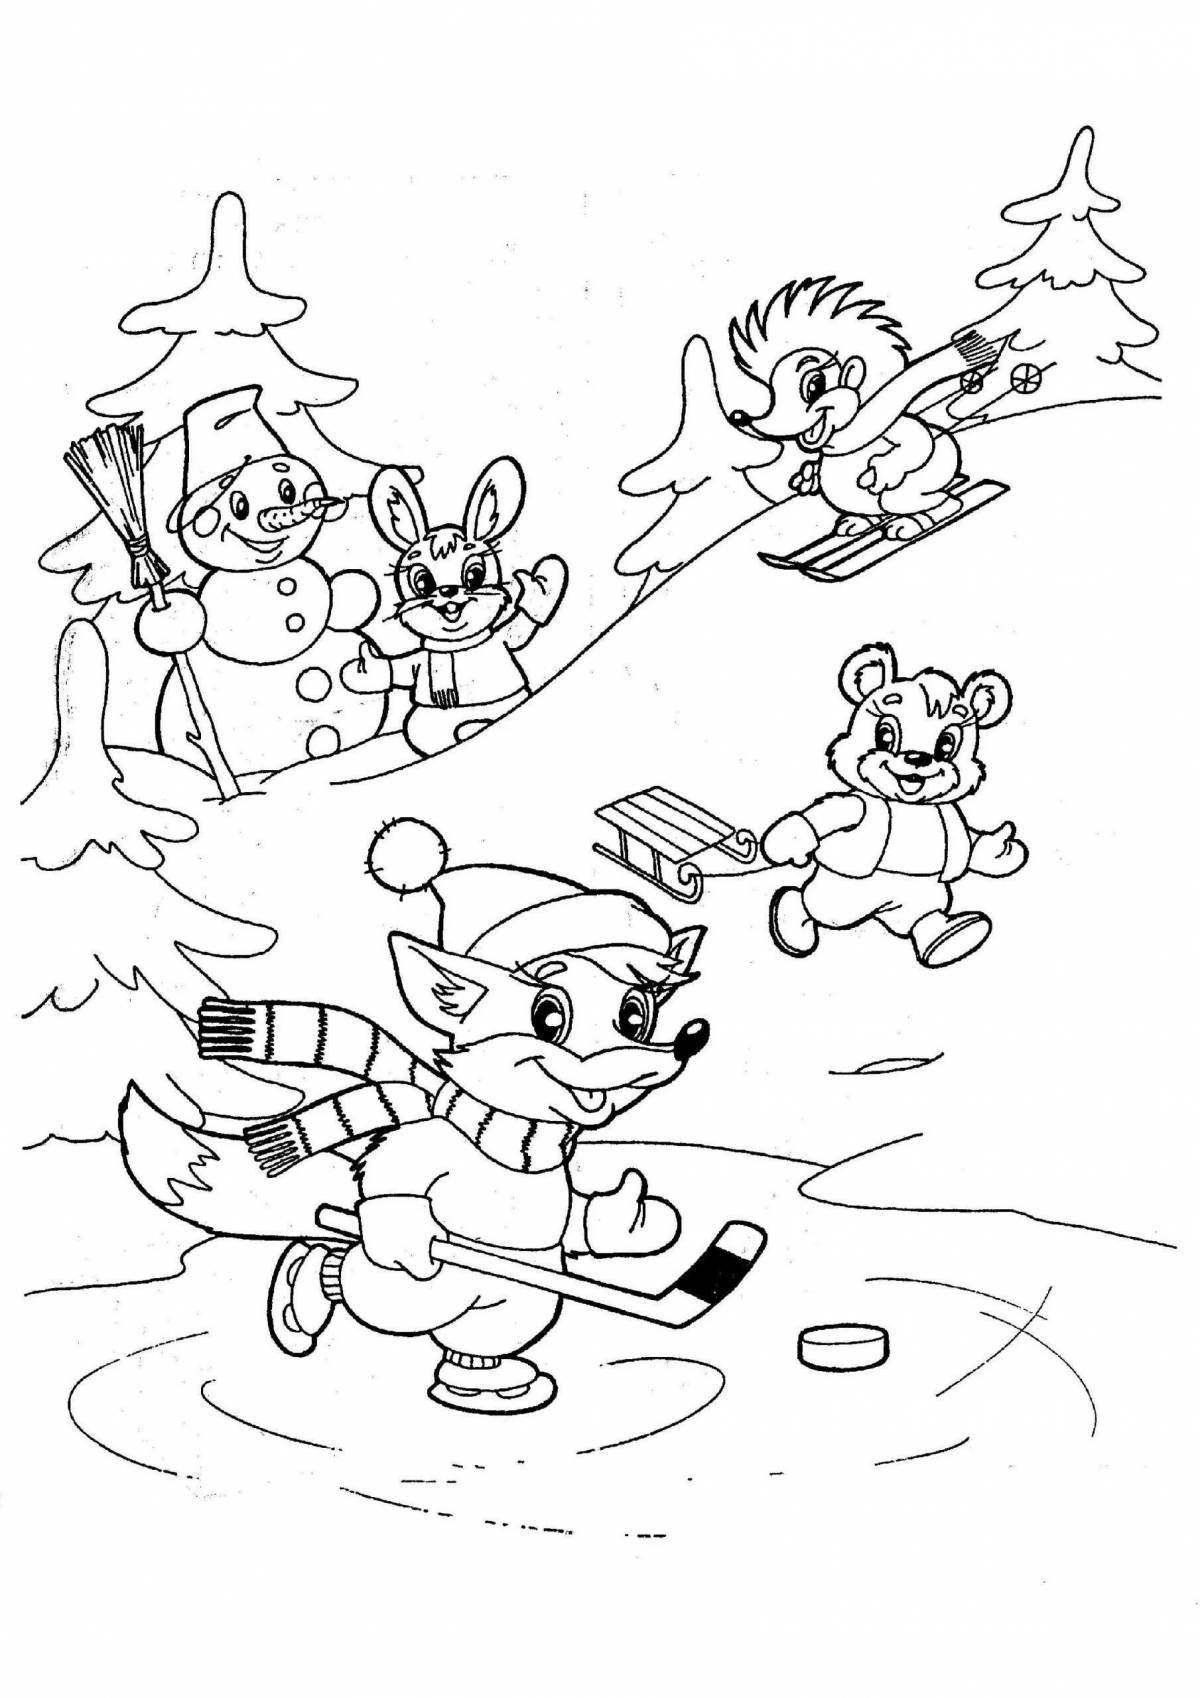 Joyous winter class 2 coloring page